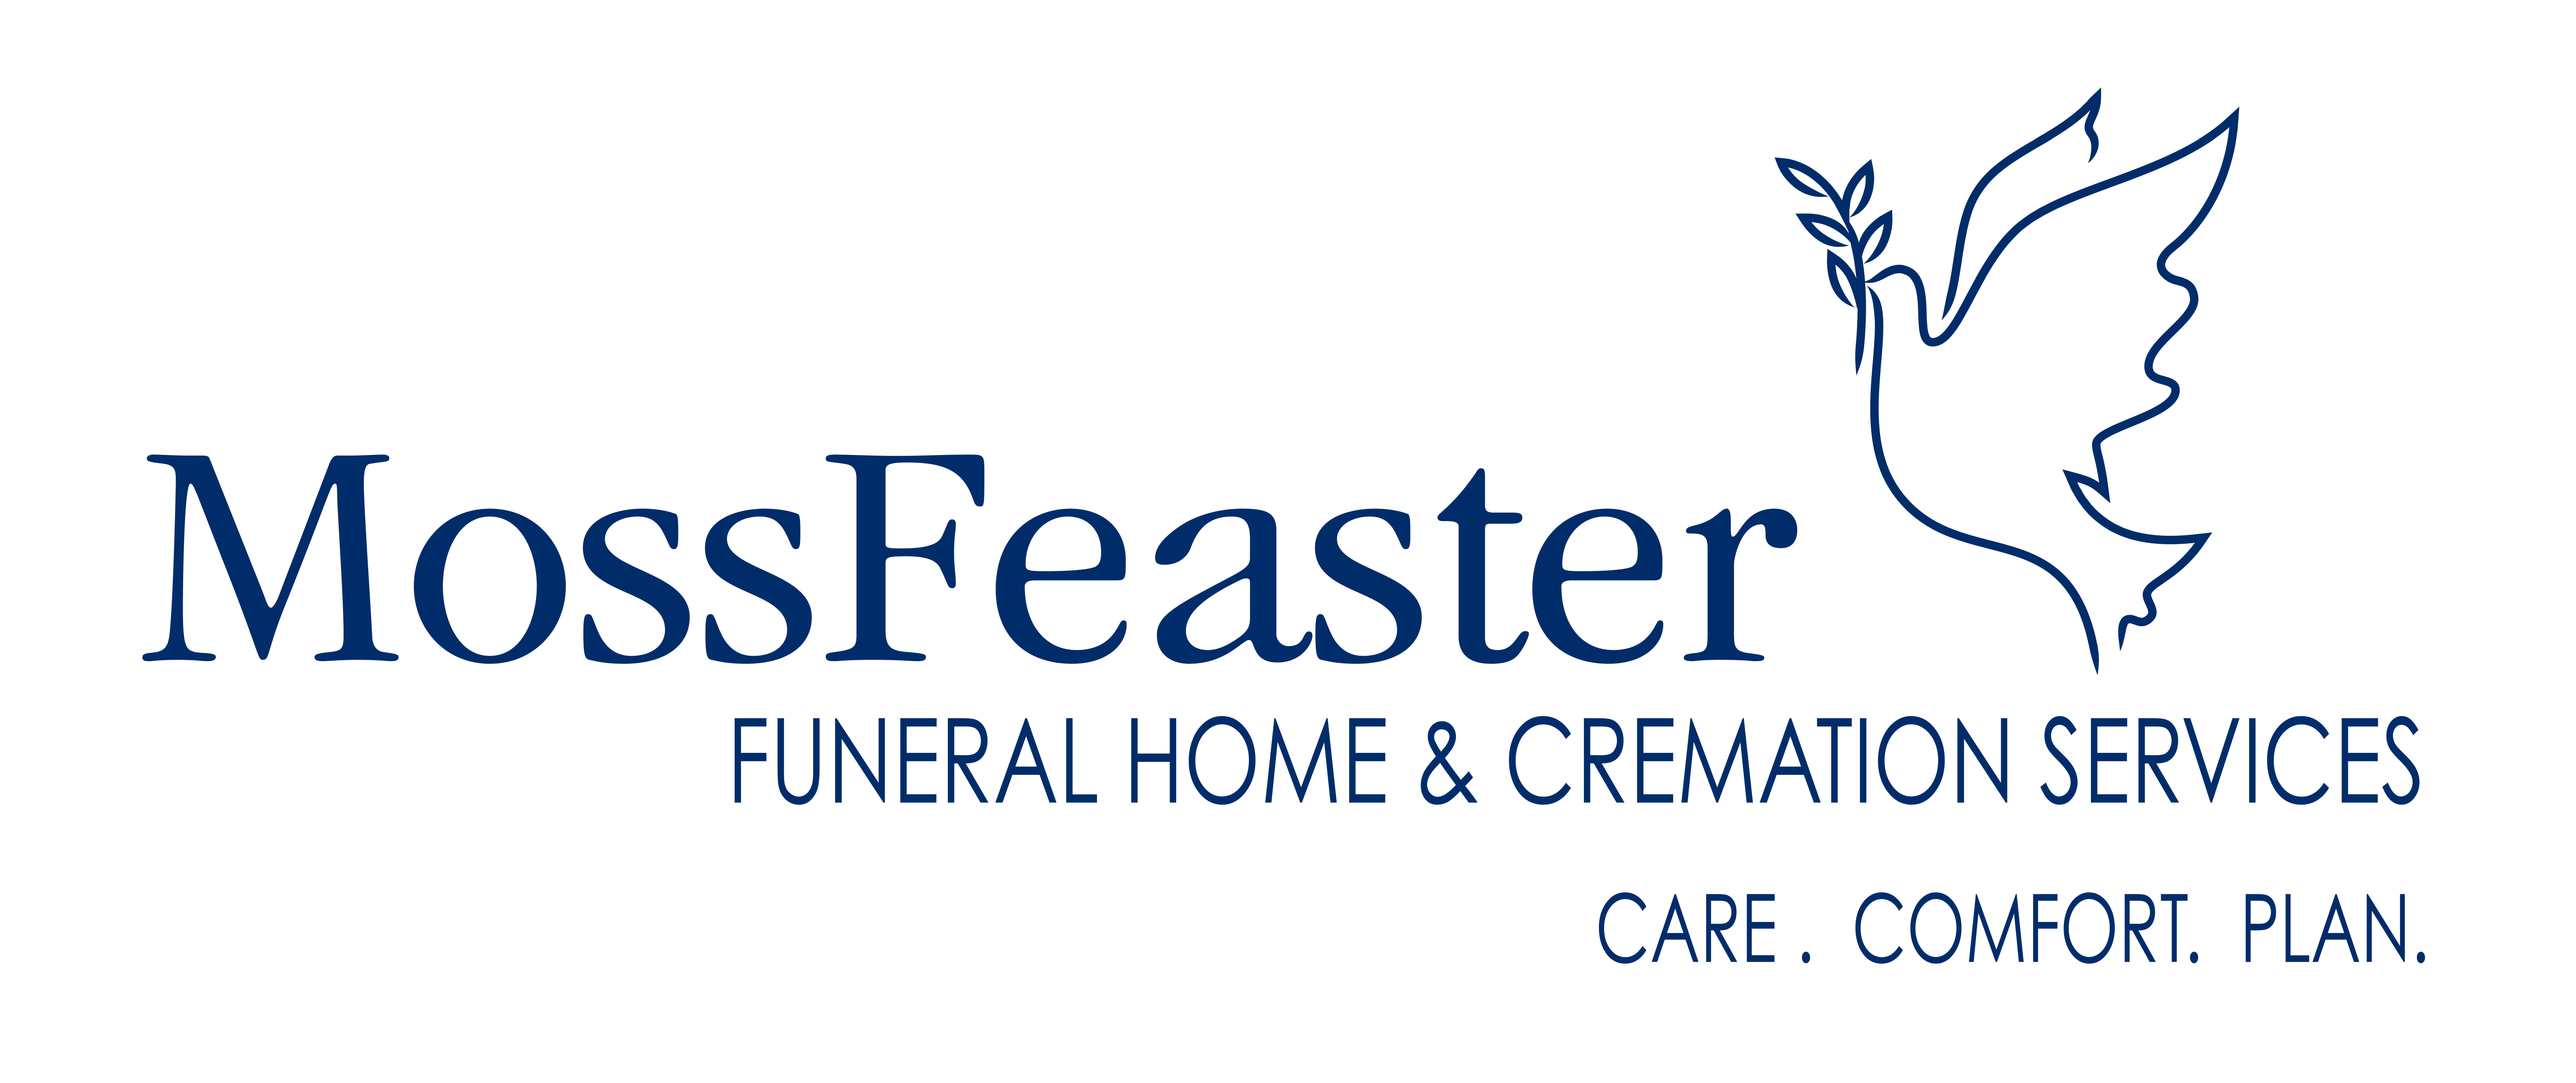 Moss Feaster Funeral Homes